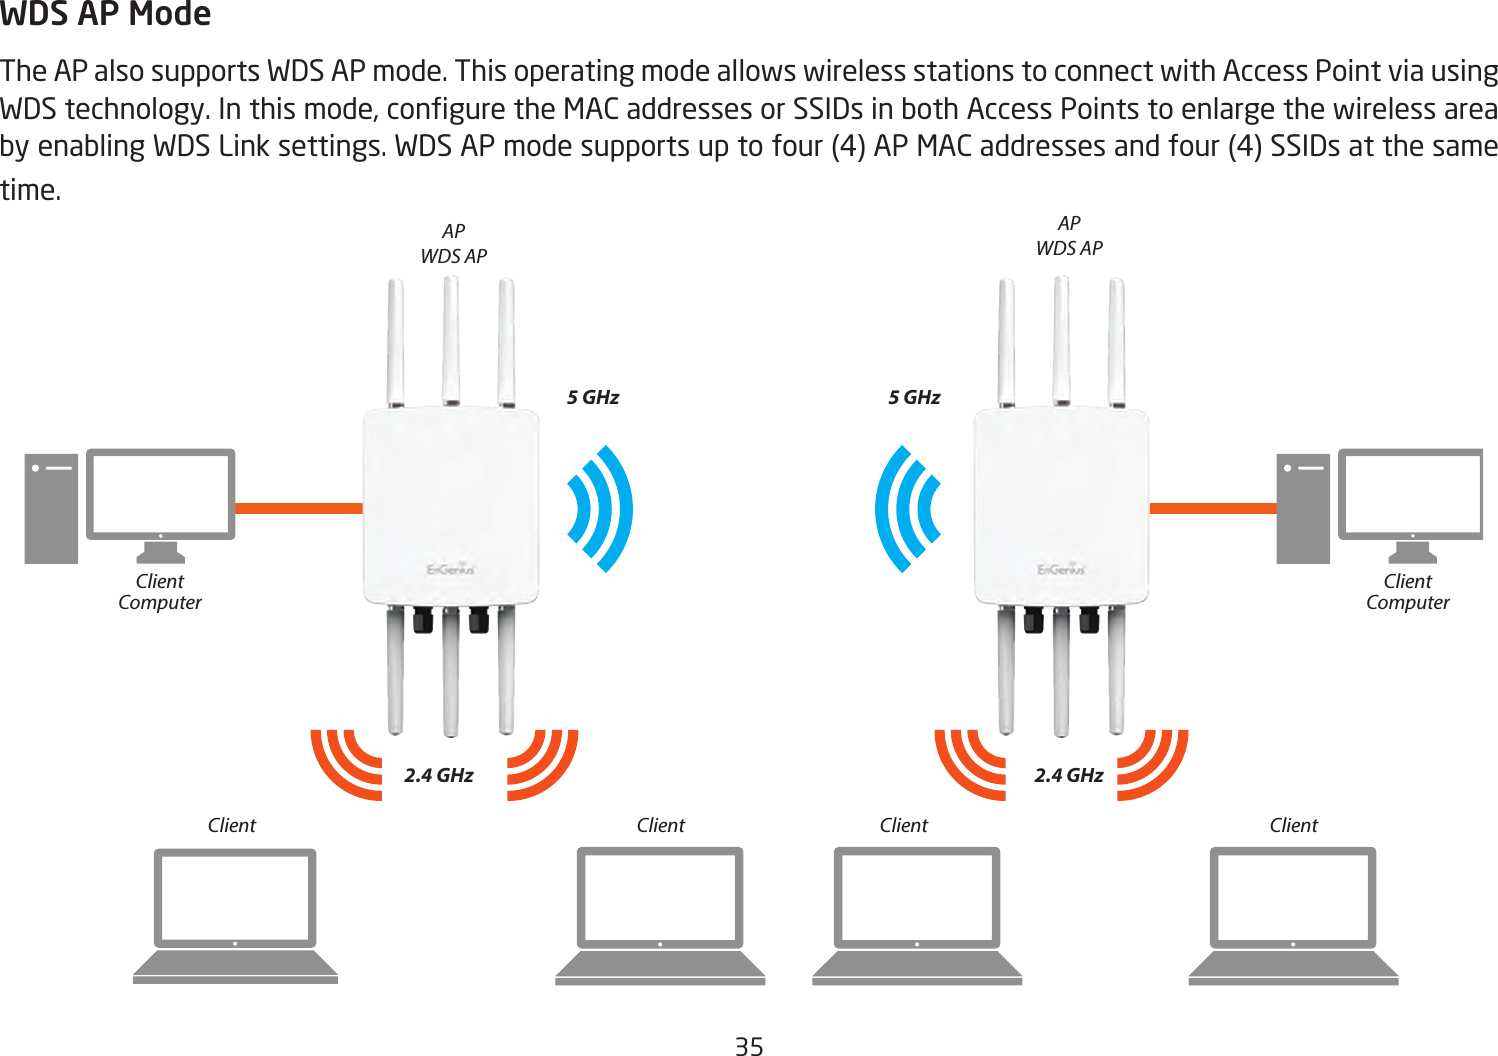 35  WDS AP ModeThe AP also supports WDS AP mode. This operating mode allows wireless stations to connect with Access Point via using WDStechnology.Inthismode,conguretheMACaddressesorSSIDsinbothAccessPointstoenlargethewirelessareabyenablingWDSLinksettings.WDSAPmodesupportsuptofour(4)APMACaddressesandfour(4)SSIDsatthesametime.APWDS APAPWDS AP2.4 GHz 2.4 GHz5 GHz 5 GHzClient Client Client ClientClientComputerClientComputer